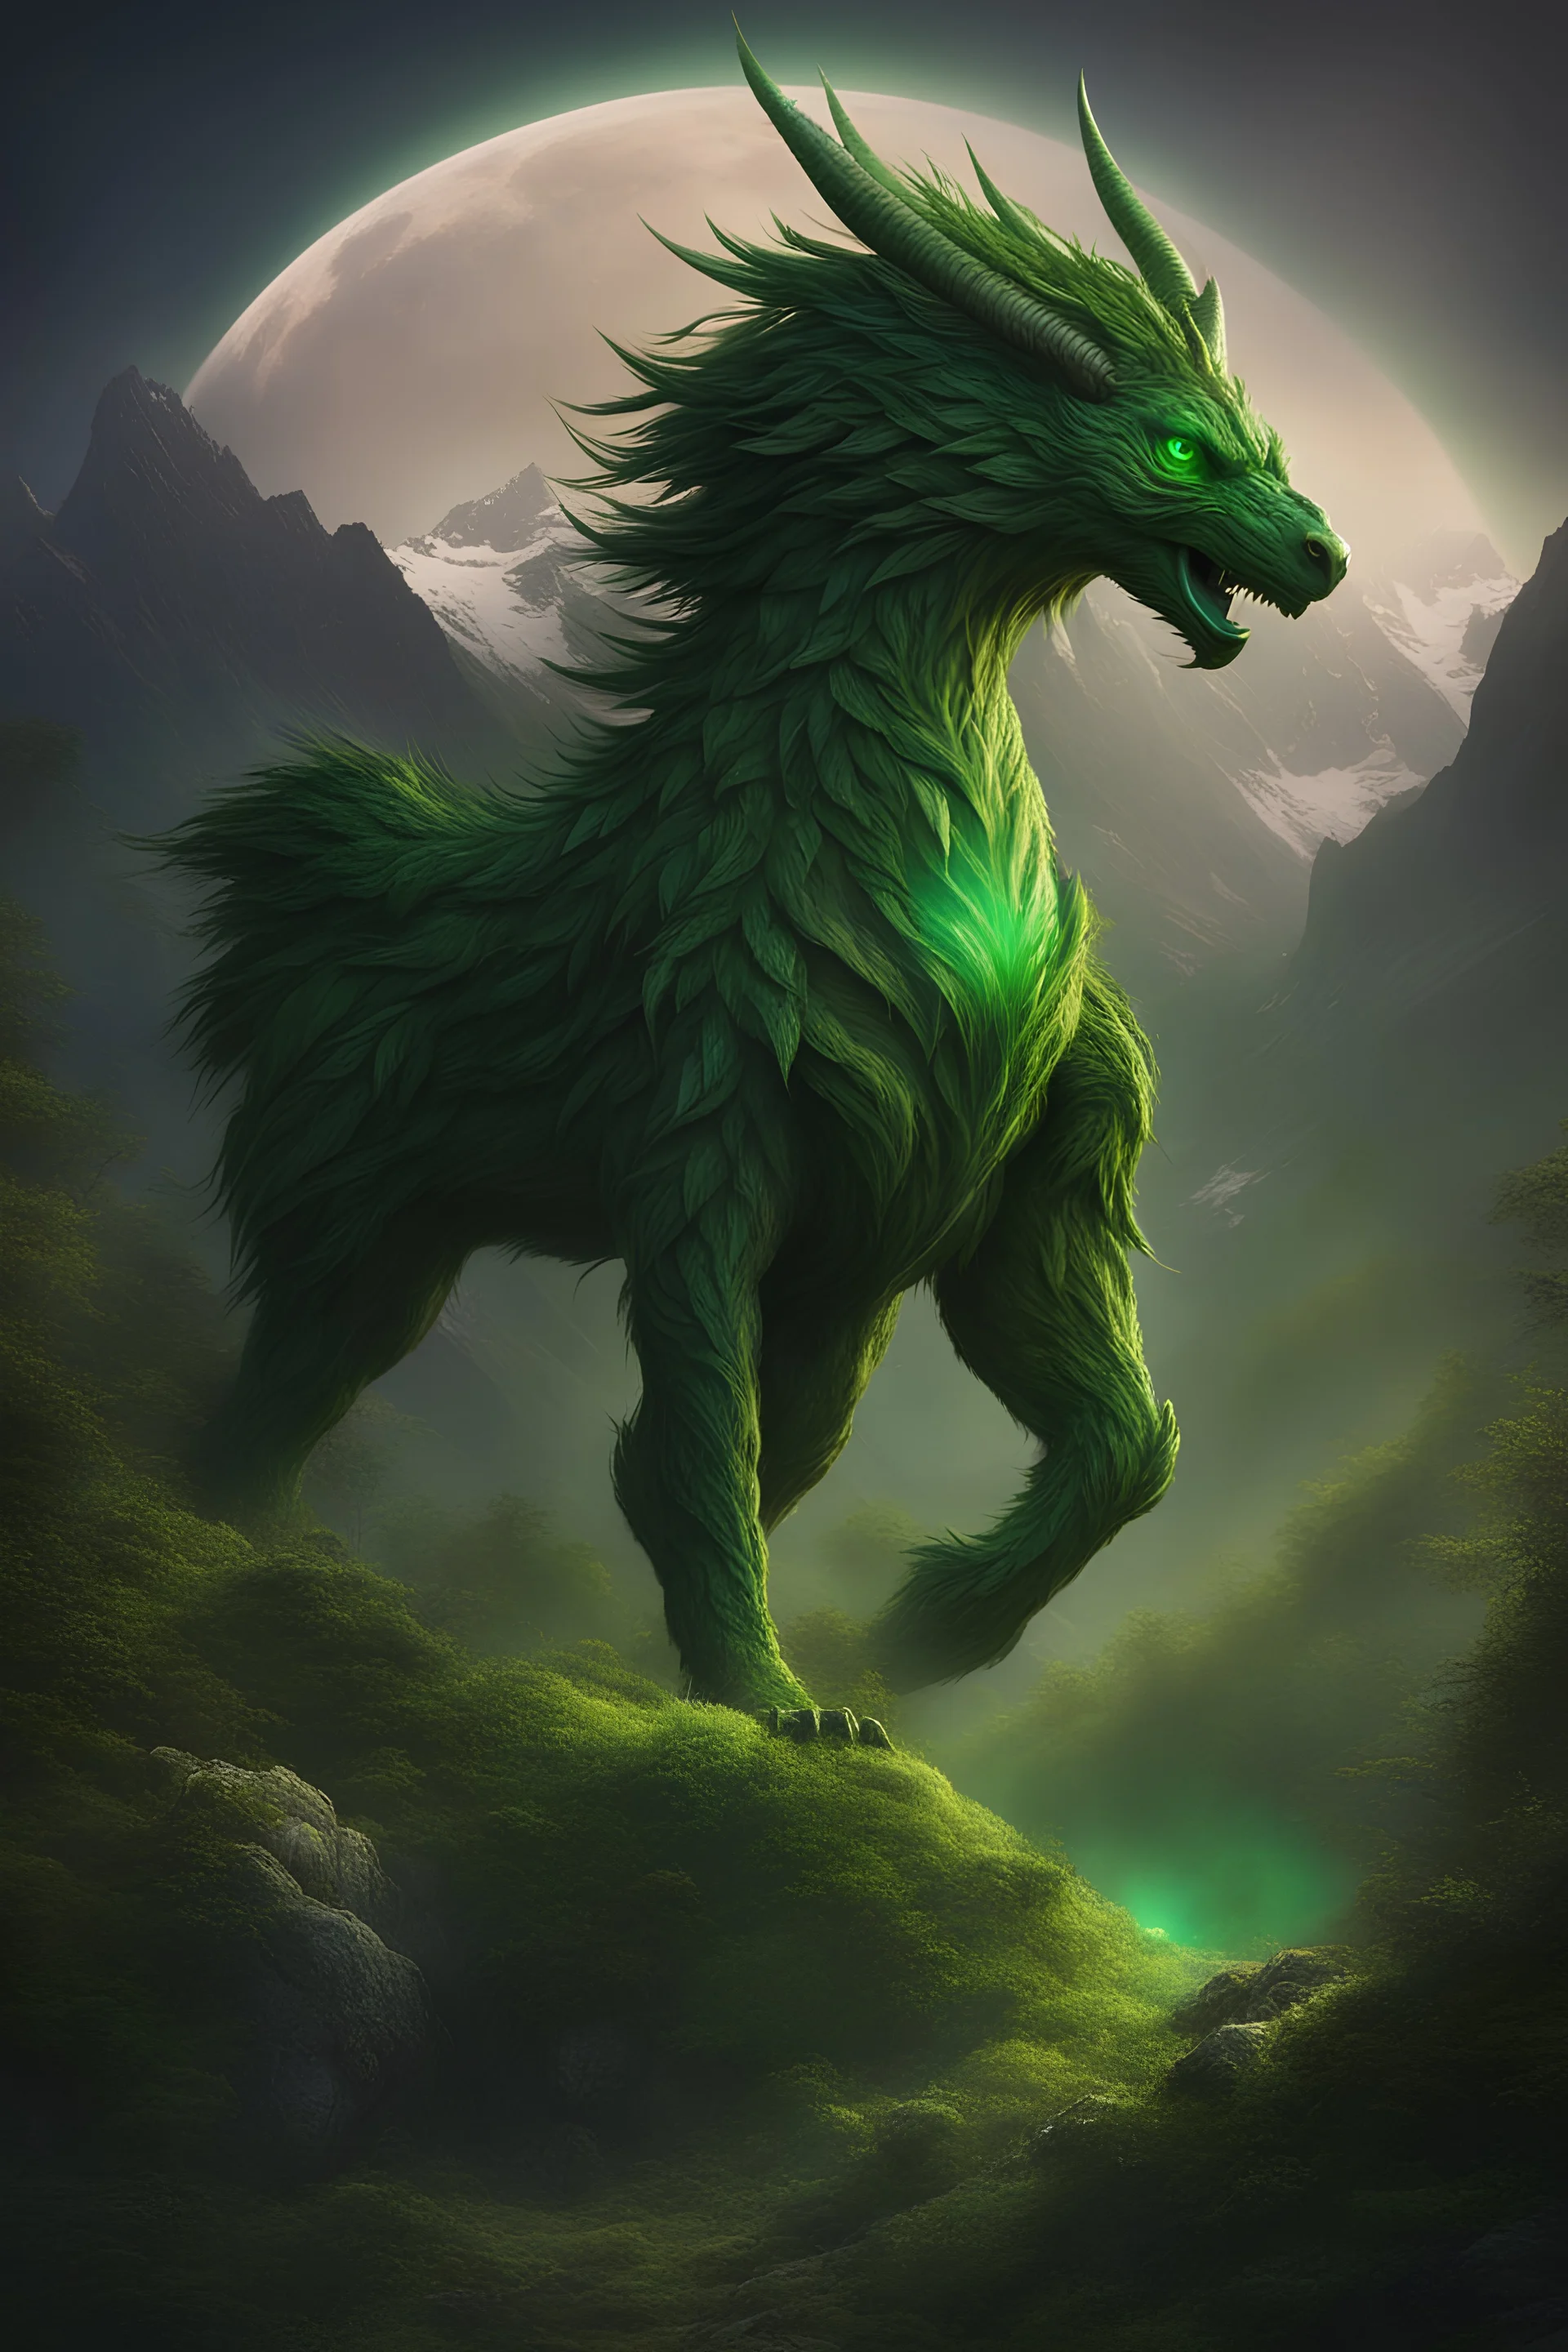 A green mythical creature shaped like a guardian of the high mountain, made of grass branches, leaves and emeralds. Surrounded by legendary peaks at night, voluminous, impressive, unforgettable